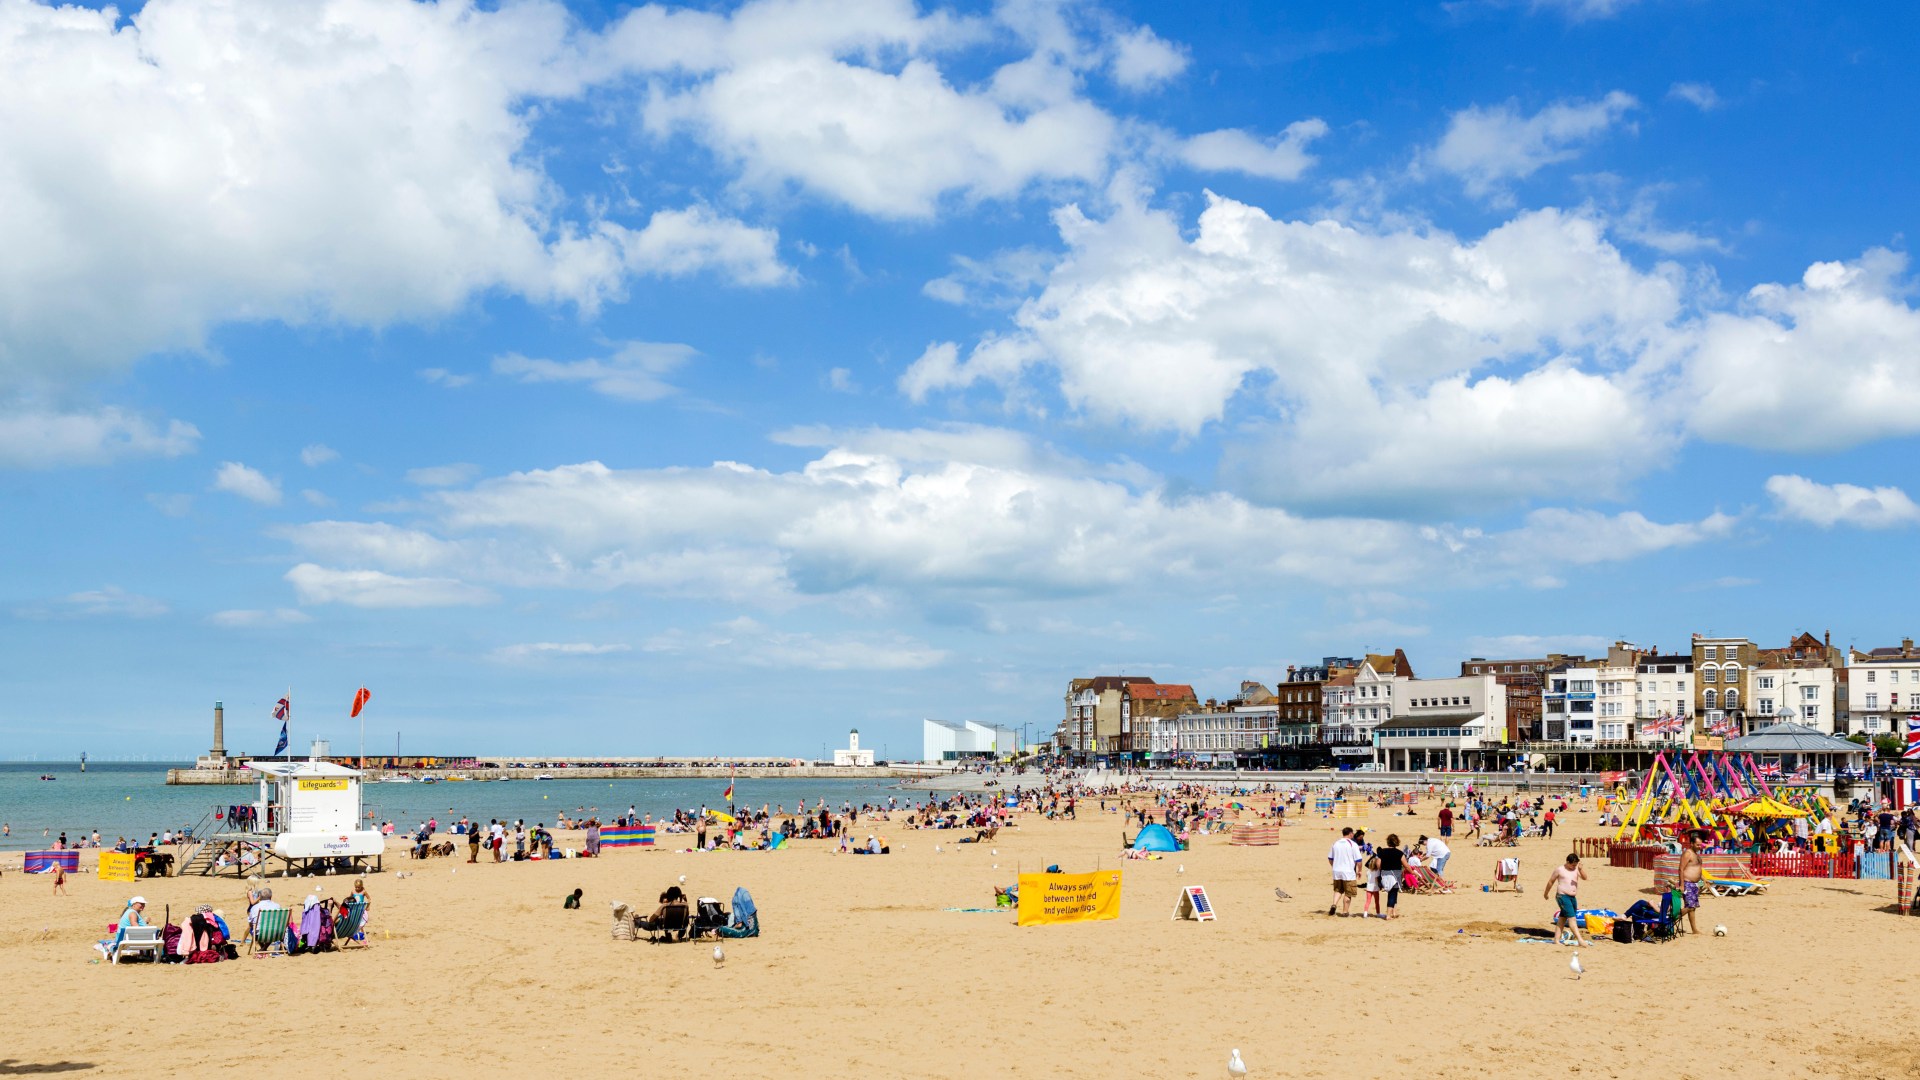 Exclusive: Hundreds of UK Beaches Set to Enforce Strict Ban Rules Next Month – Are You Prepared?